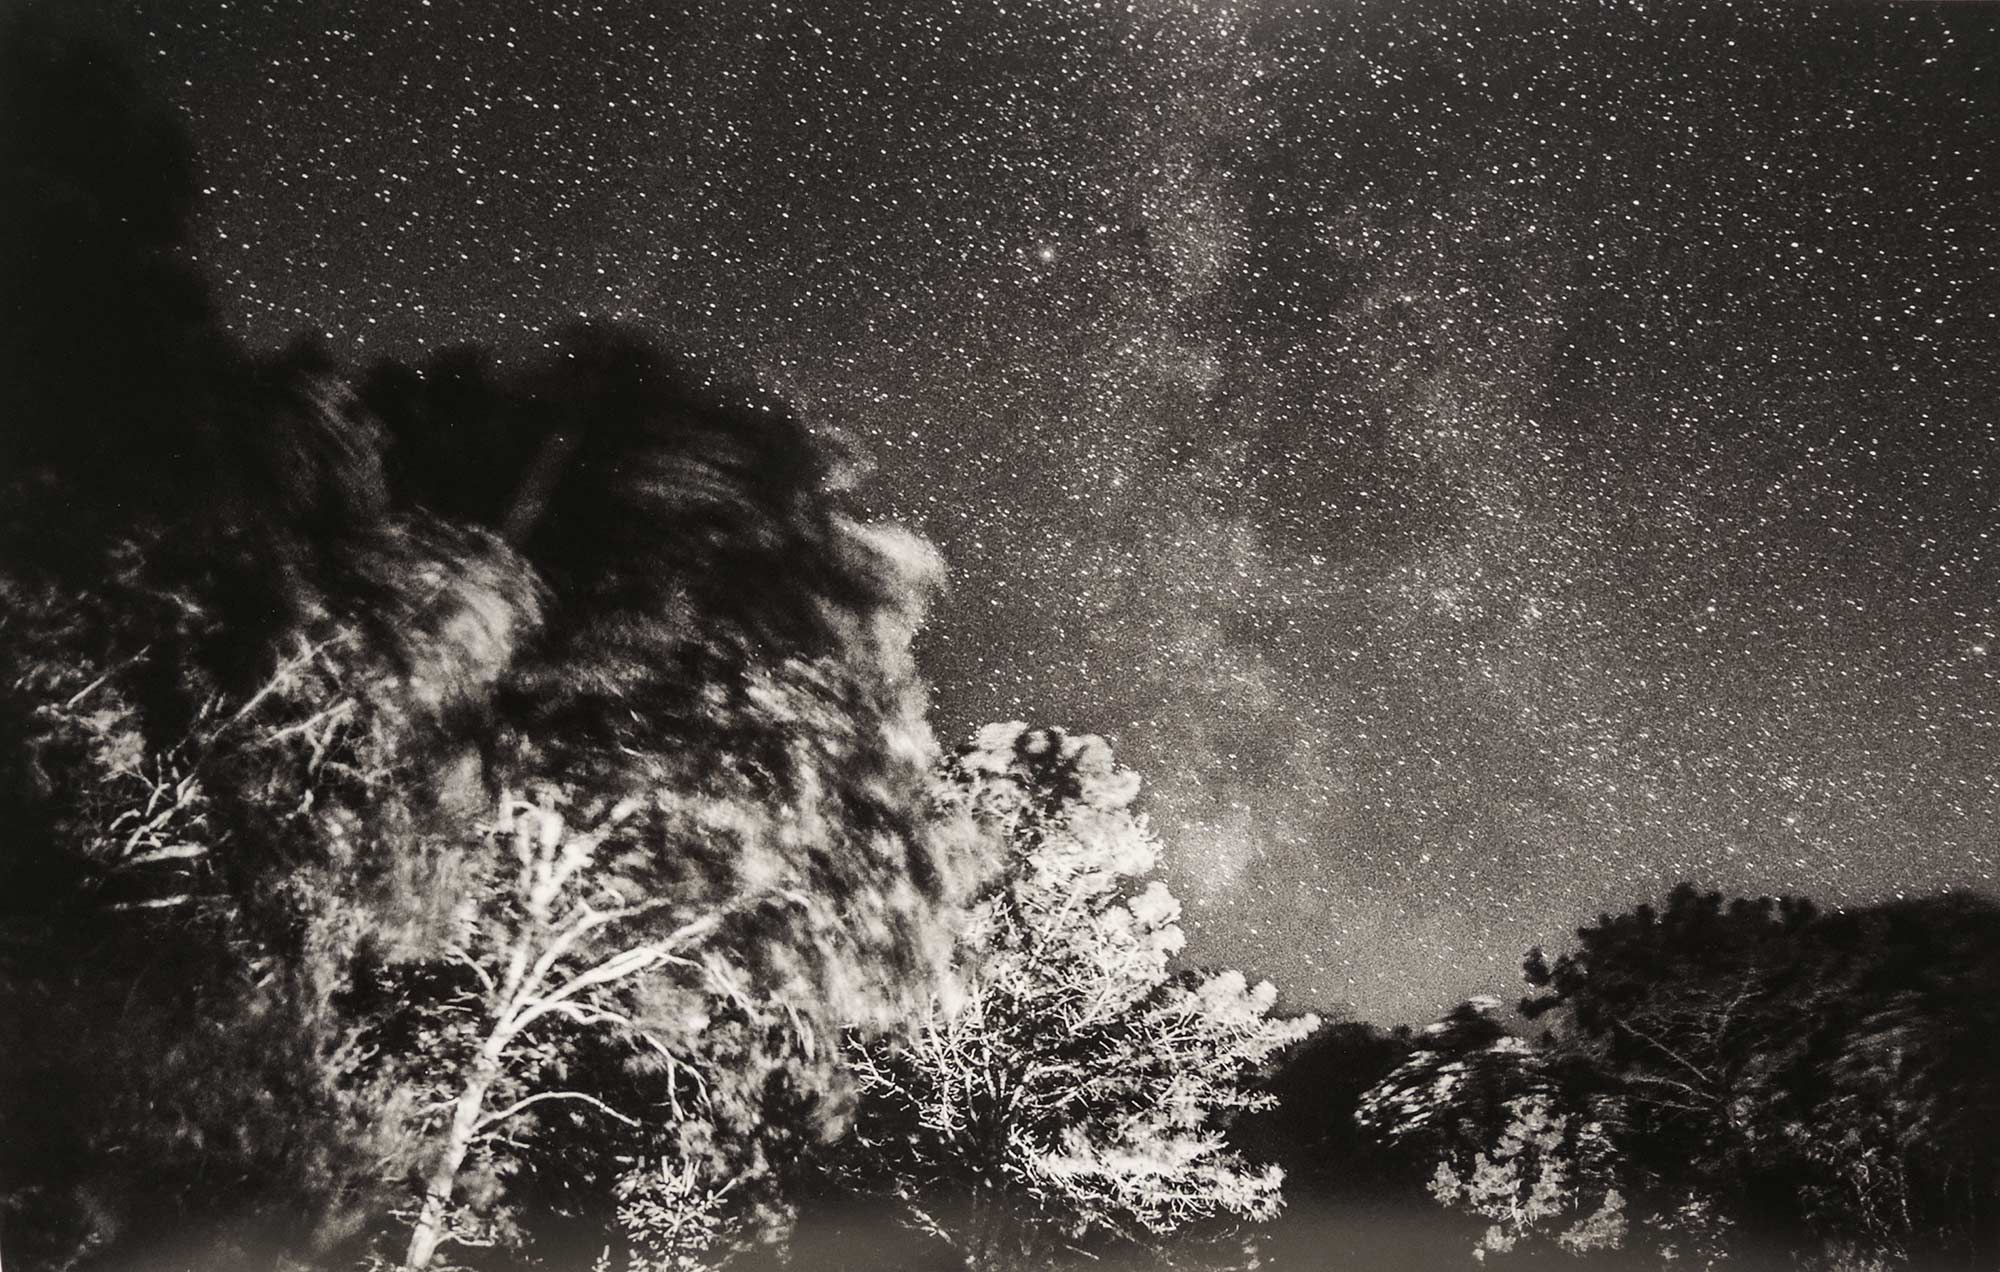 A photograph by Gabrielle Robinson of trees and a starry night